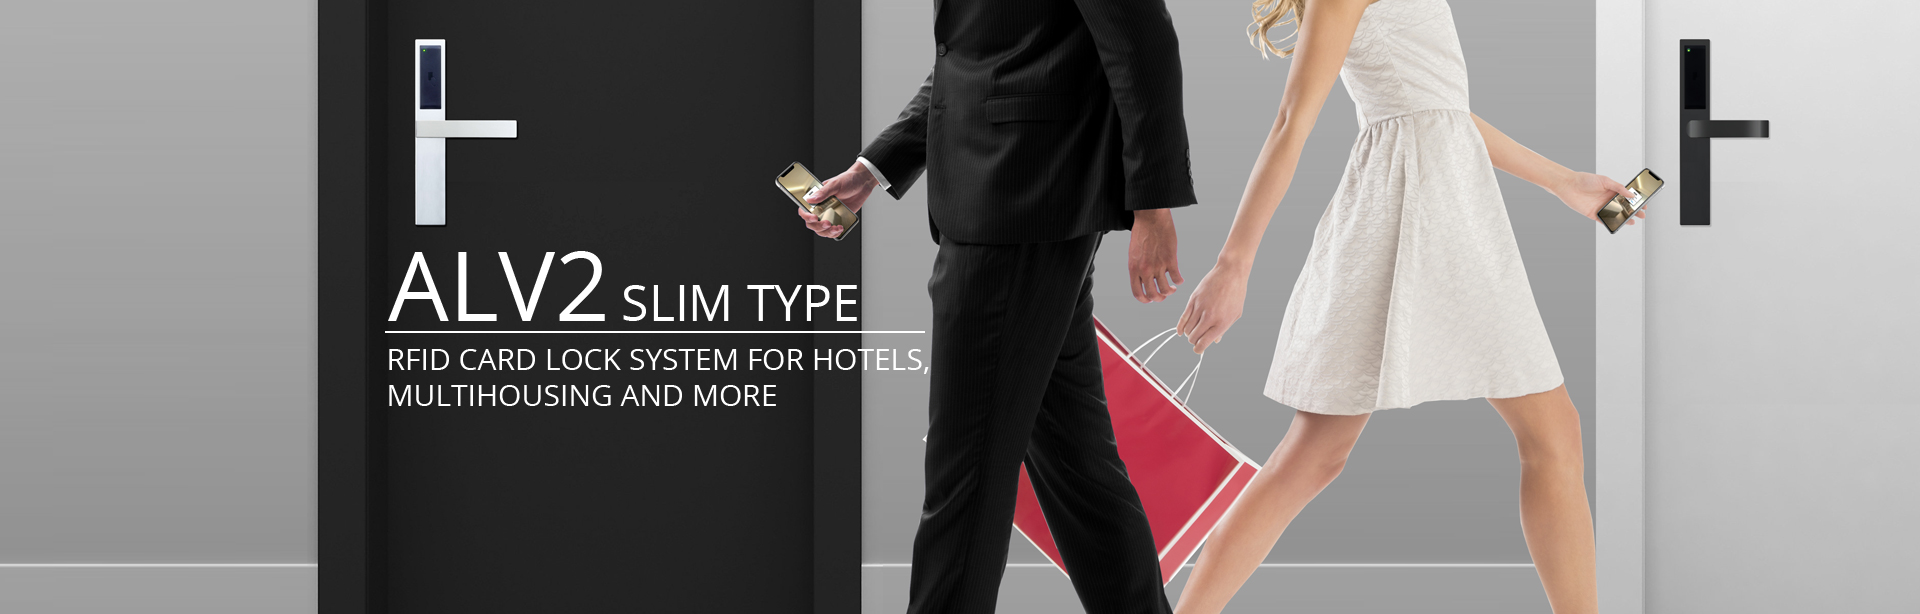 ALV2 SLIM TYPE RFID card lock system for hotels, multi housing and more.